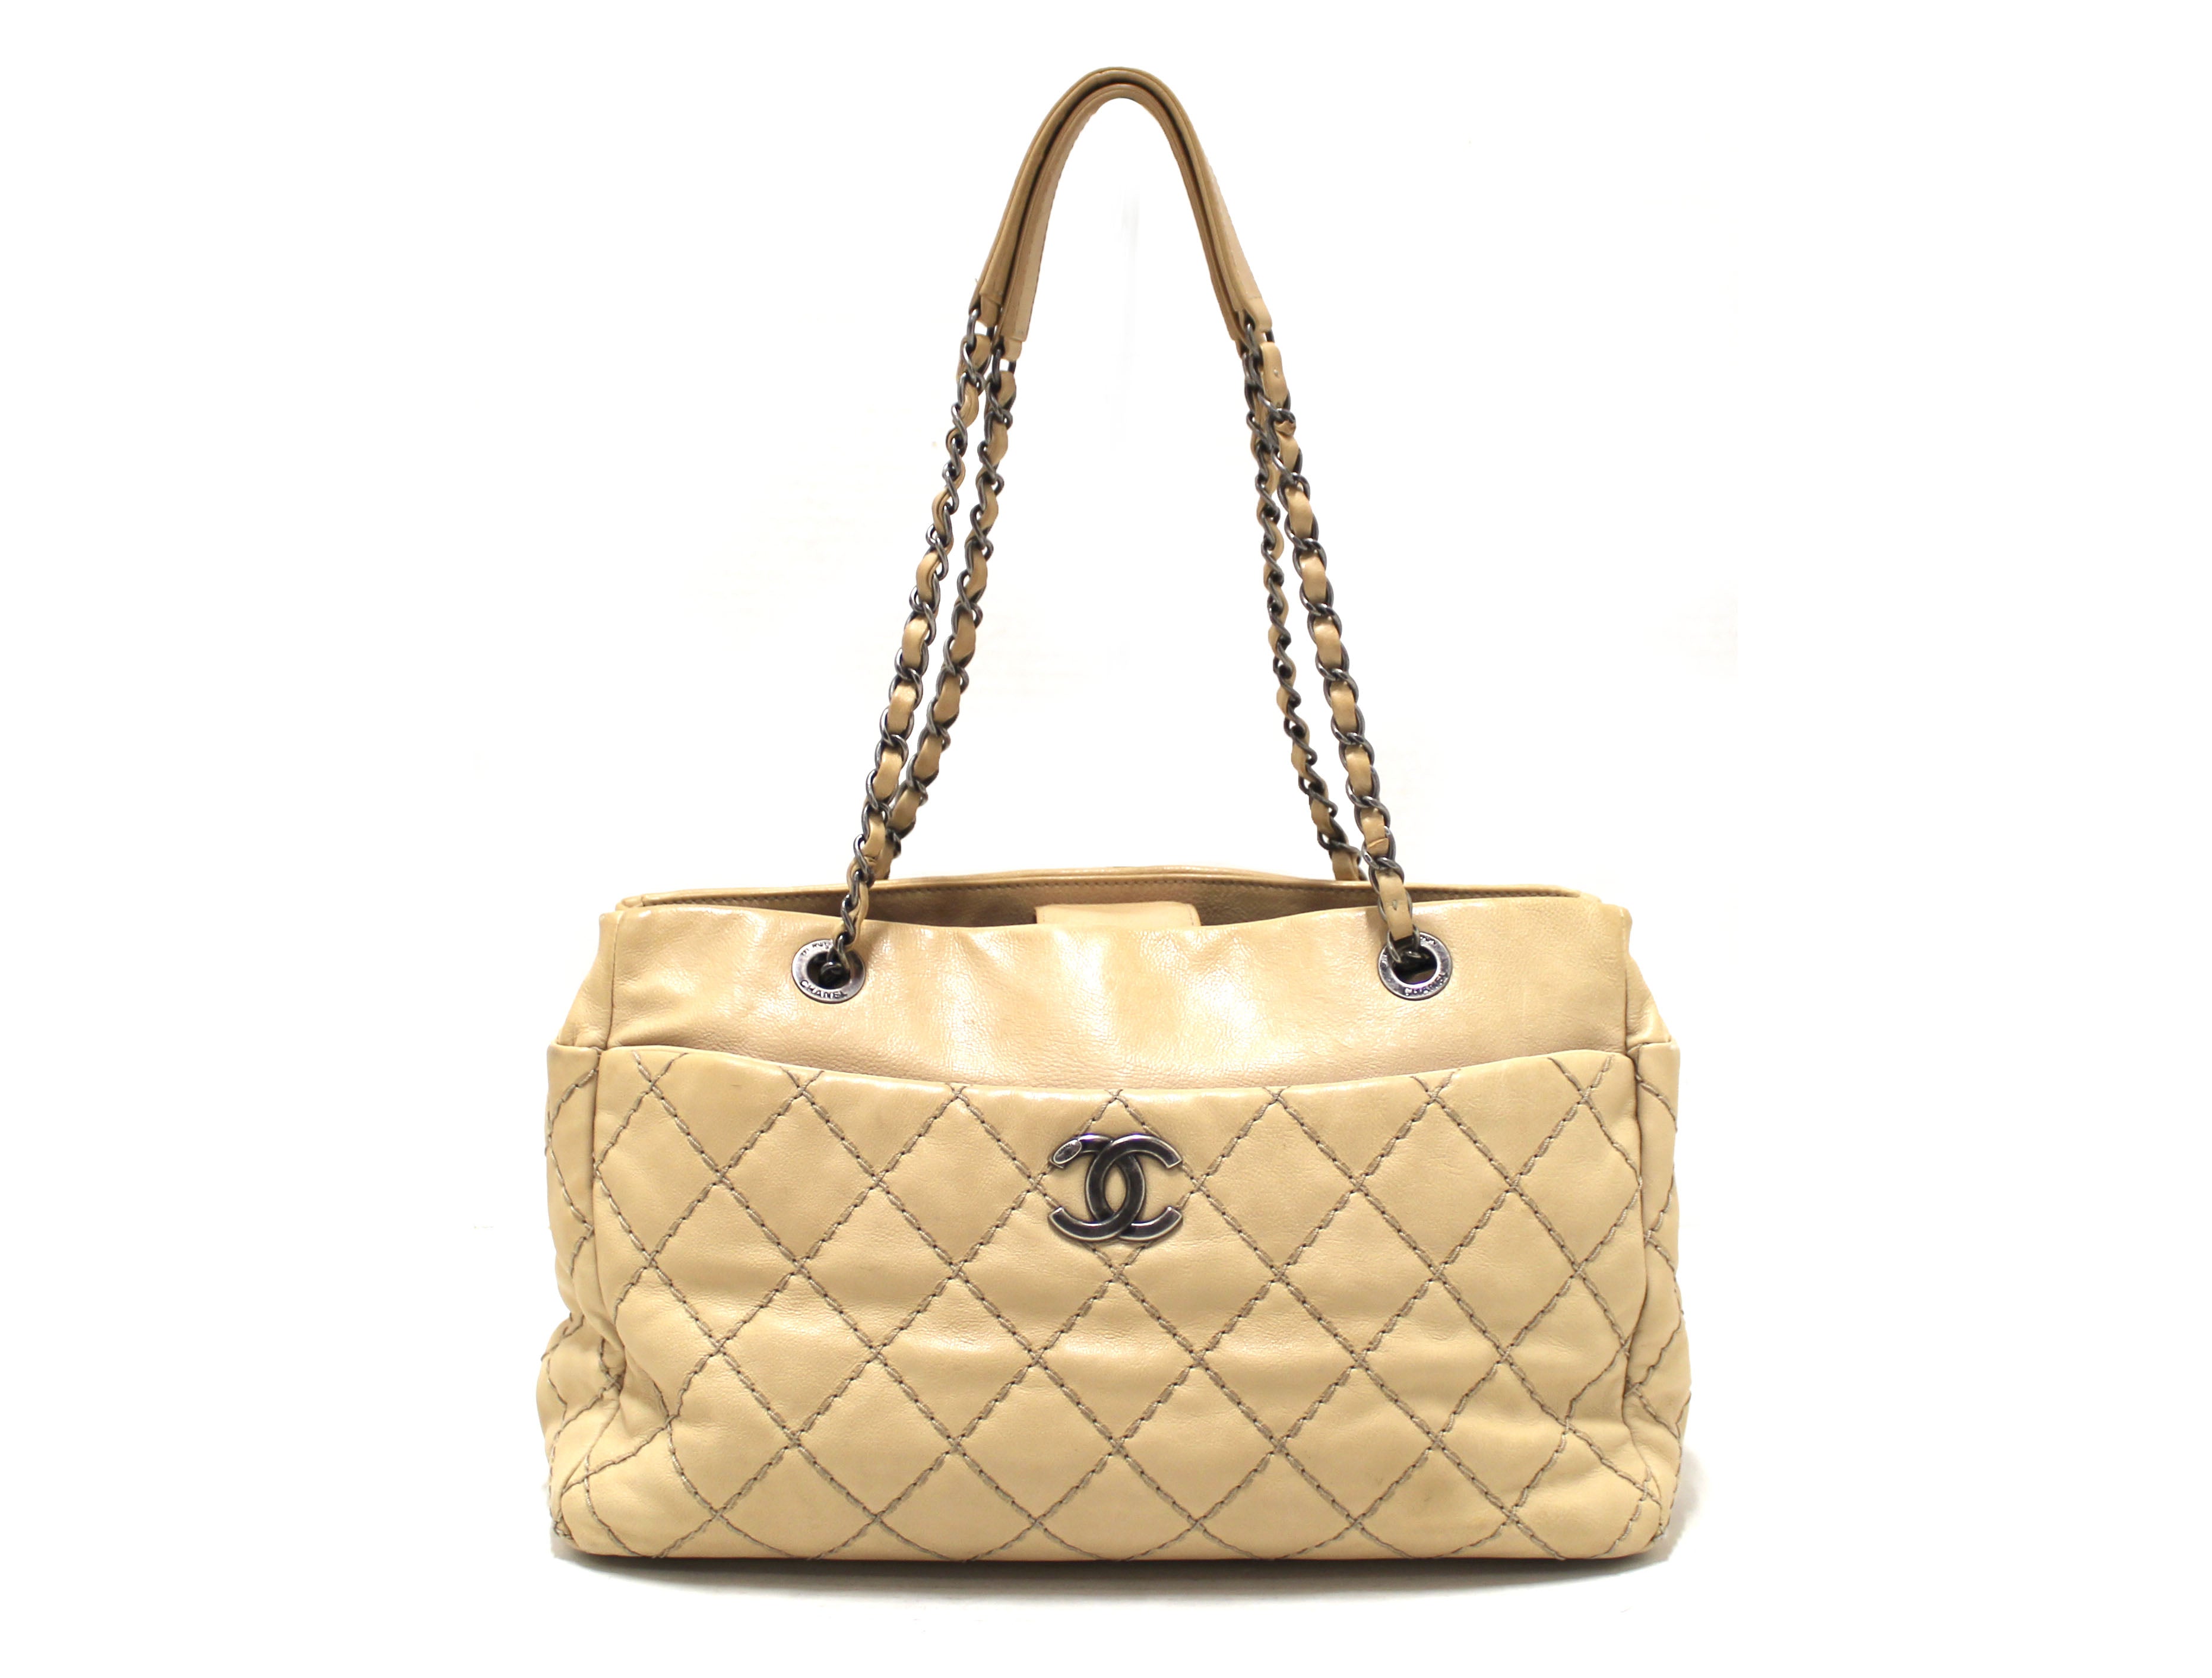 Chanel Stitched Calfskin Leather Medium Shopping Tote Beige with